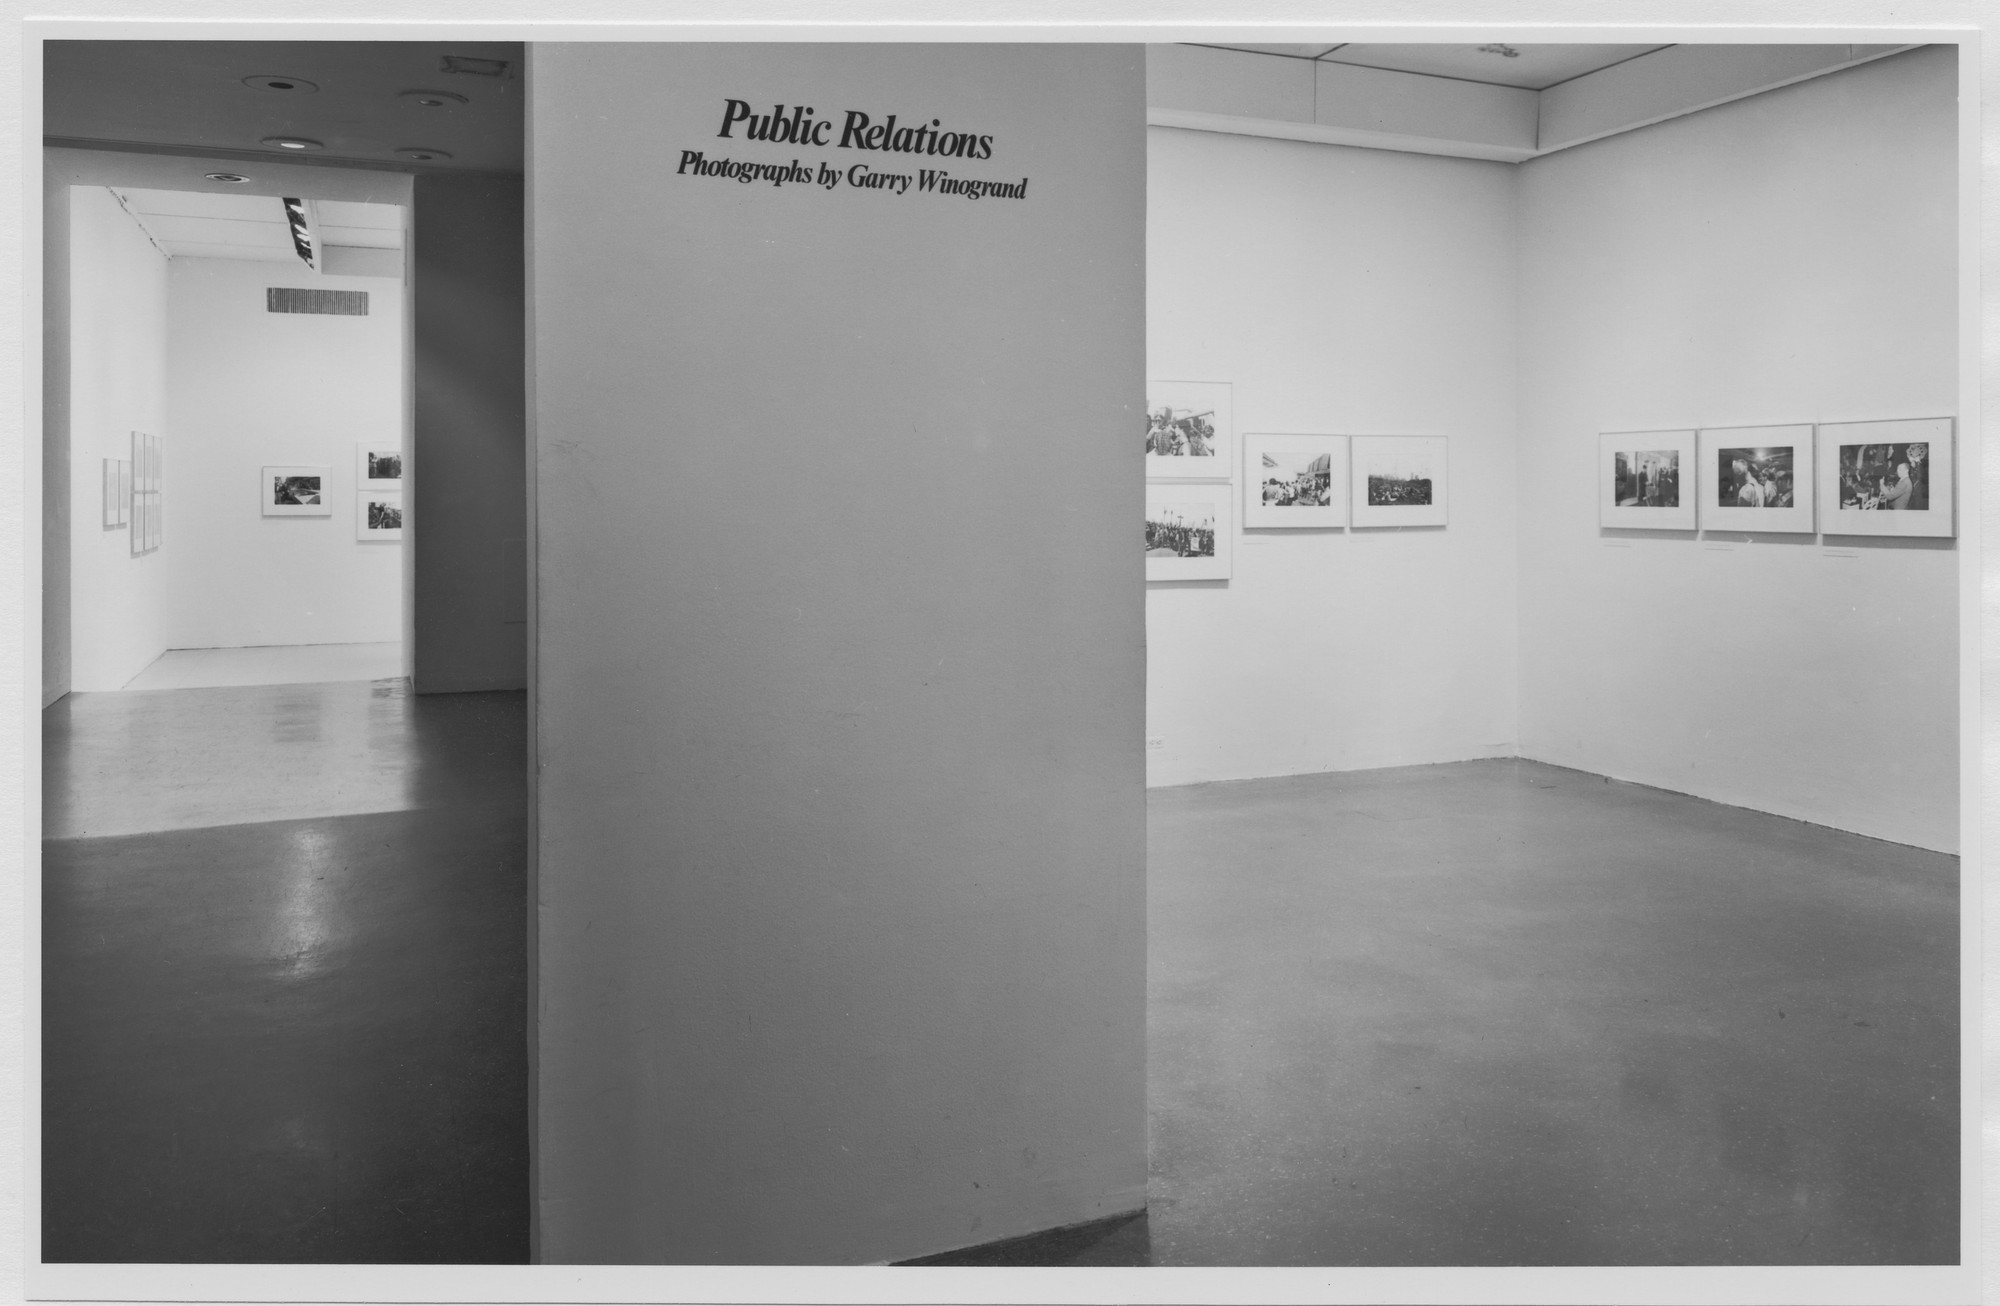 Public Relations: Photographs by Garry Winogrand | MoMA